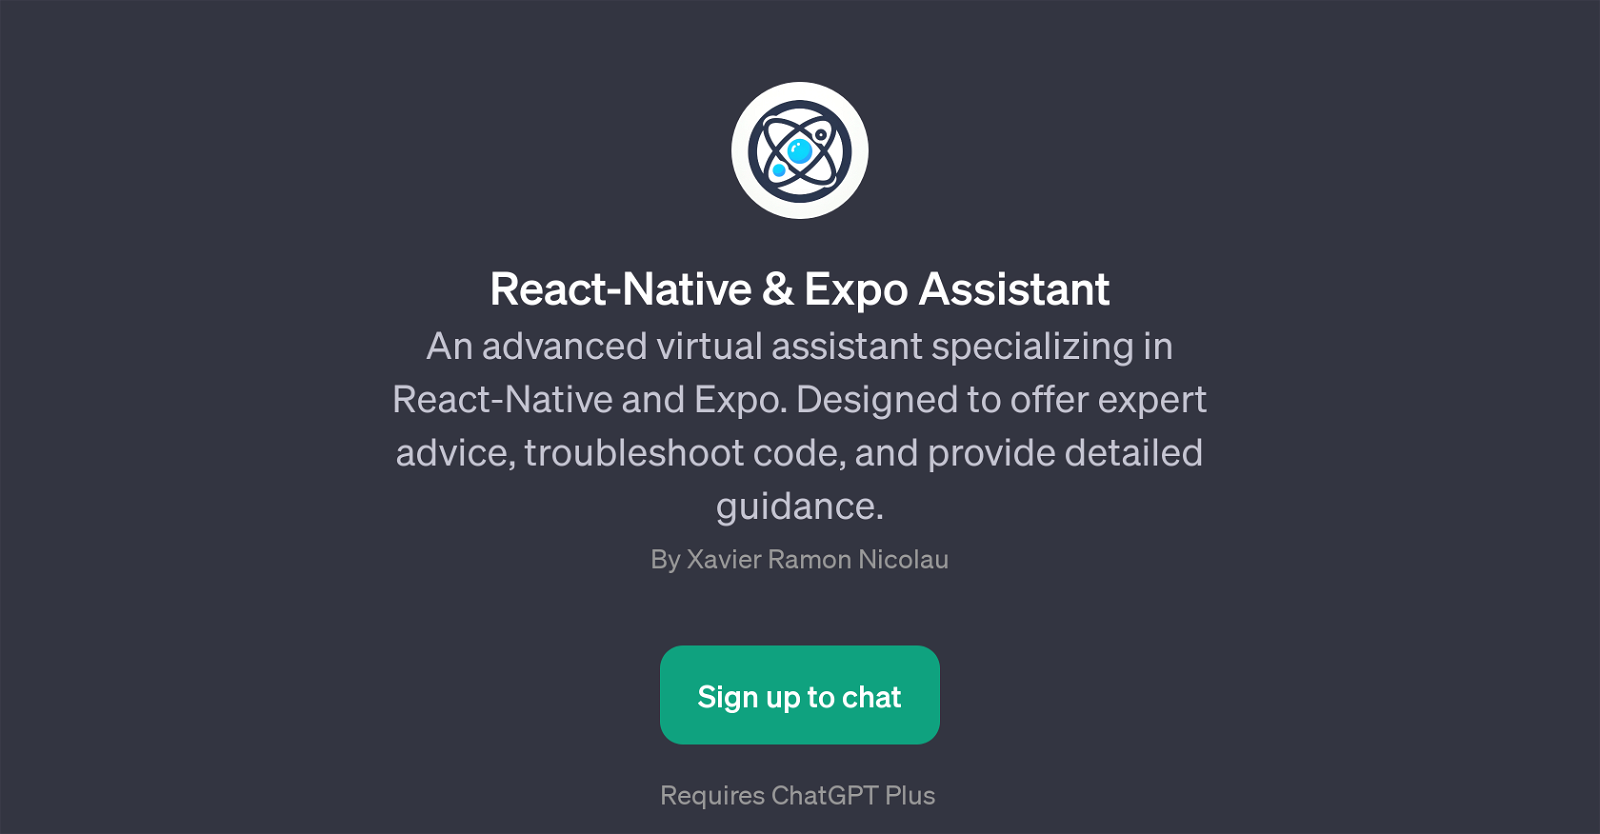 React-Native & Expo Assistant website